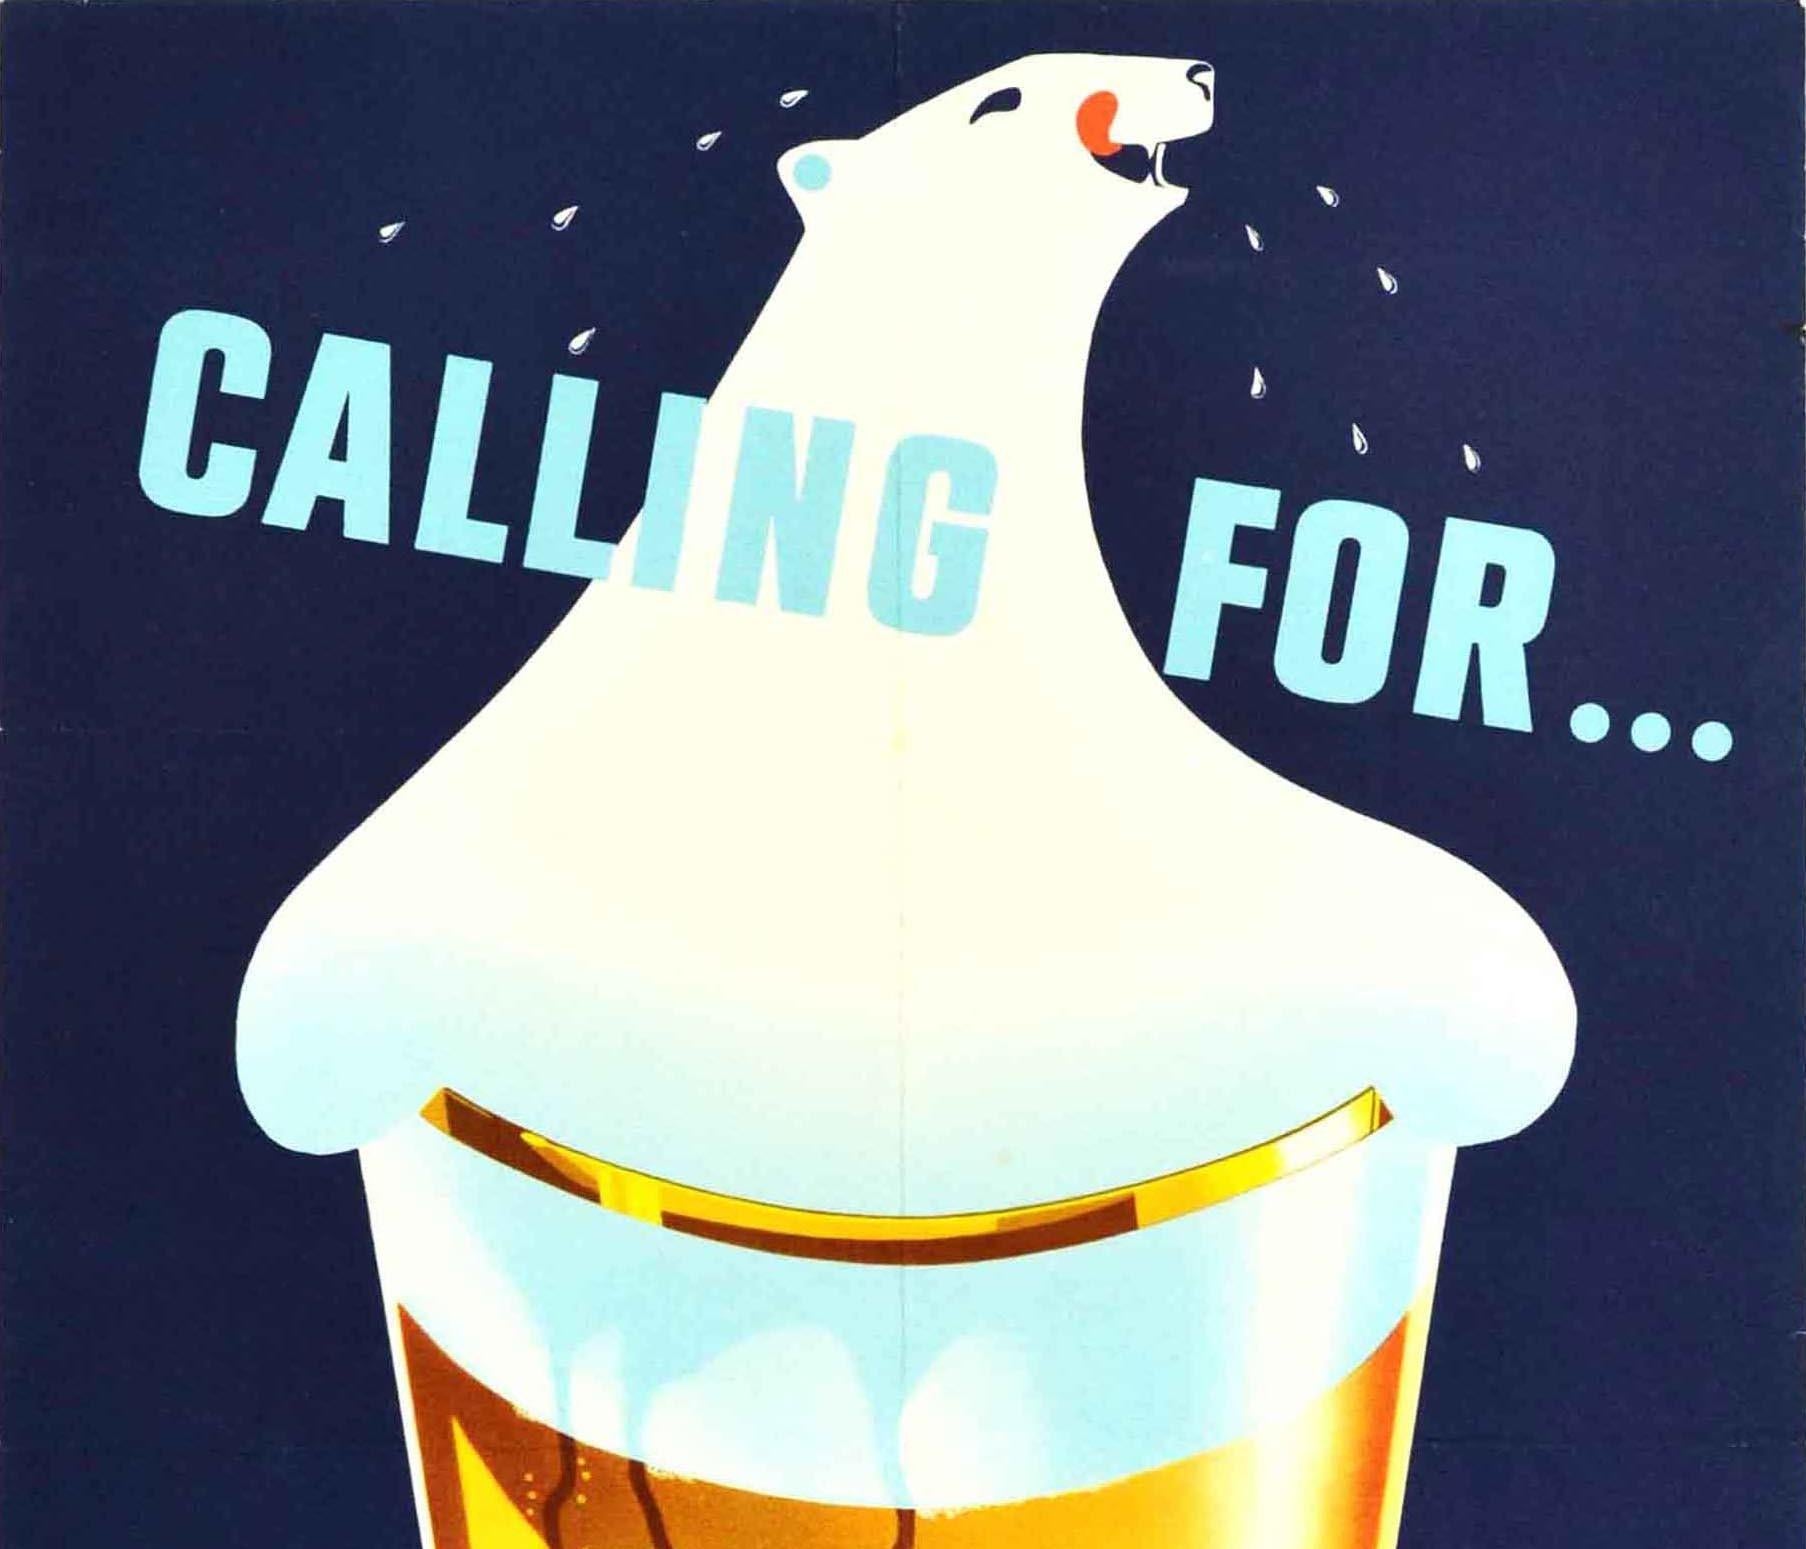 Original vintage drink advertising poster - Calling for... Carlsberg The glorious beer of Copenhagen - featuring a fun illustration of a happy white polar bear licking his lips as the froth in a tall refreshing cool glass of Carlsberg beer against a